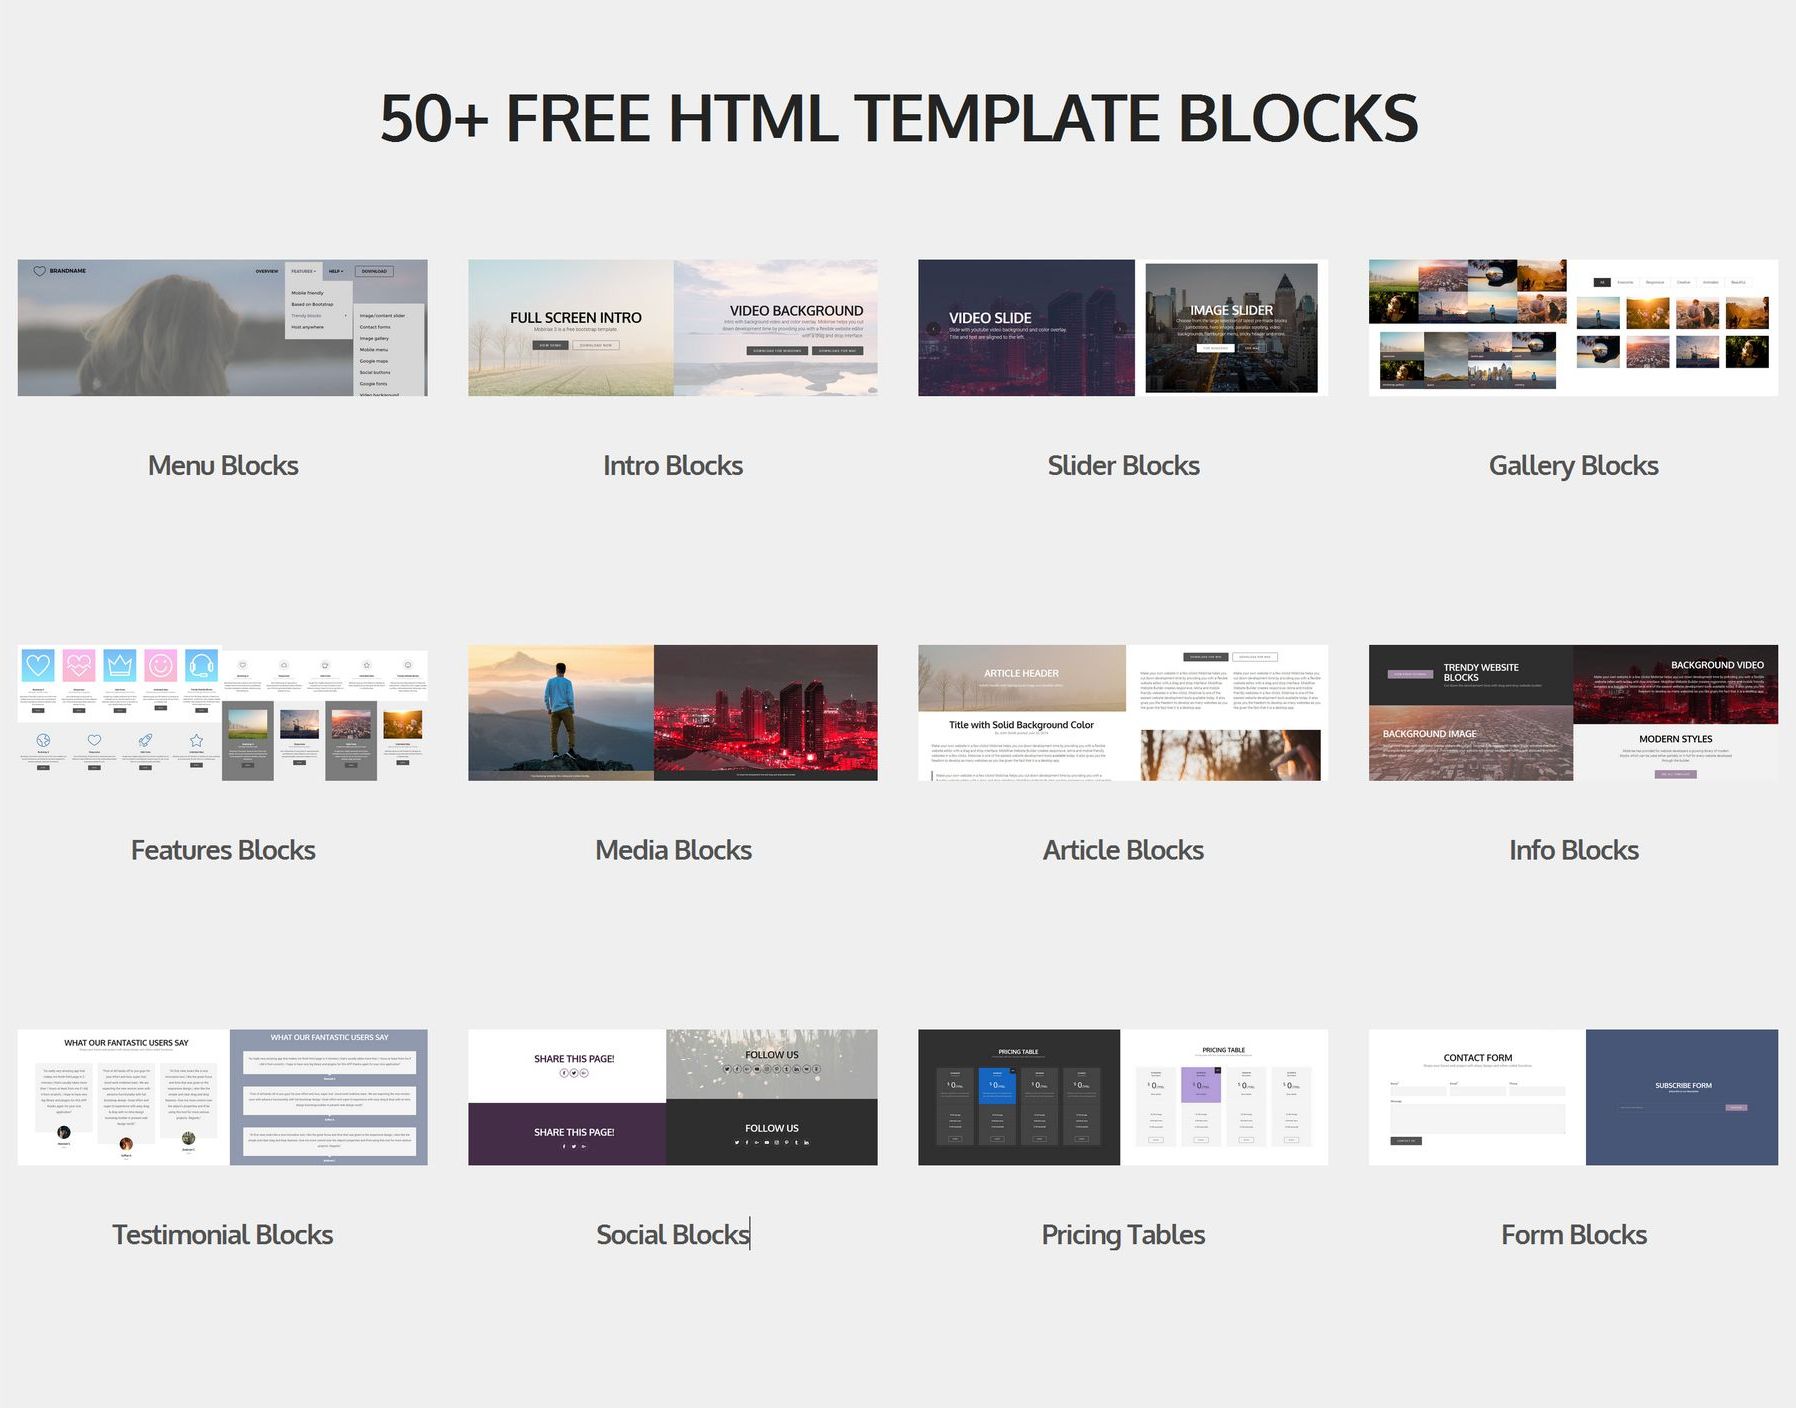 Best Free HTML5 Video Background Bootstrap Templates of 2020